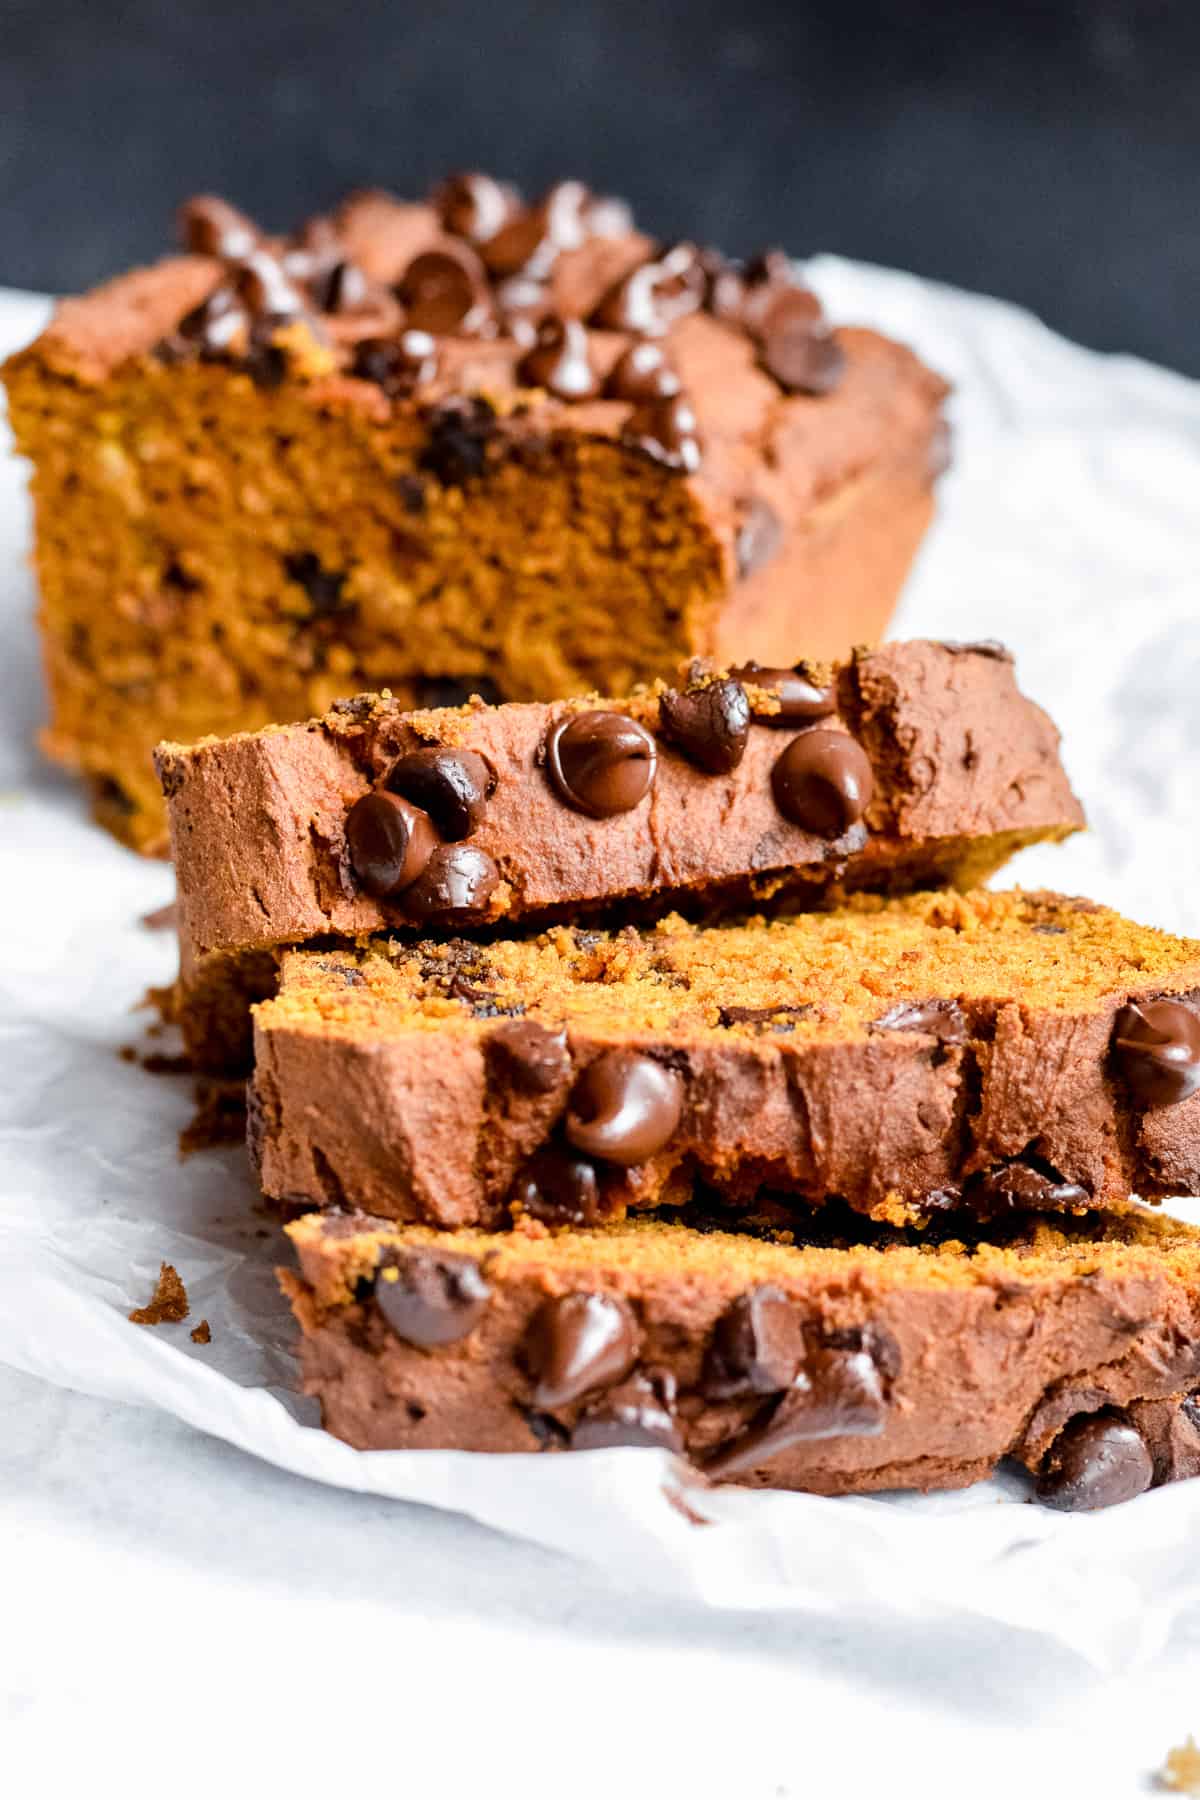 Slices of pumpkin bread with chocolate chips.